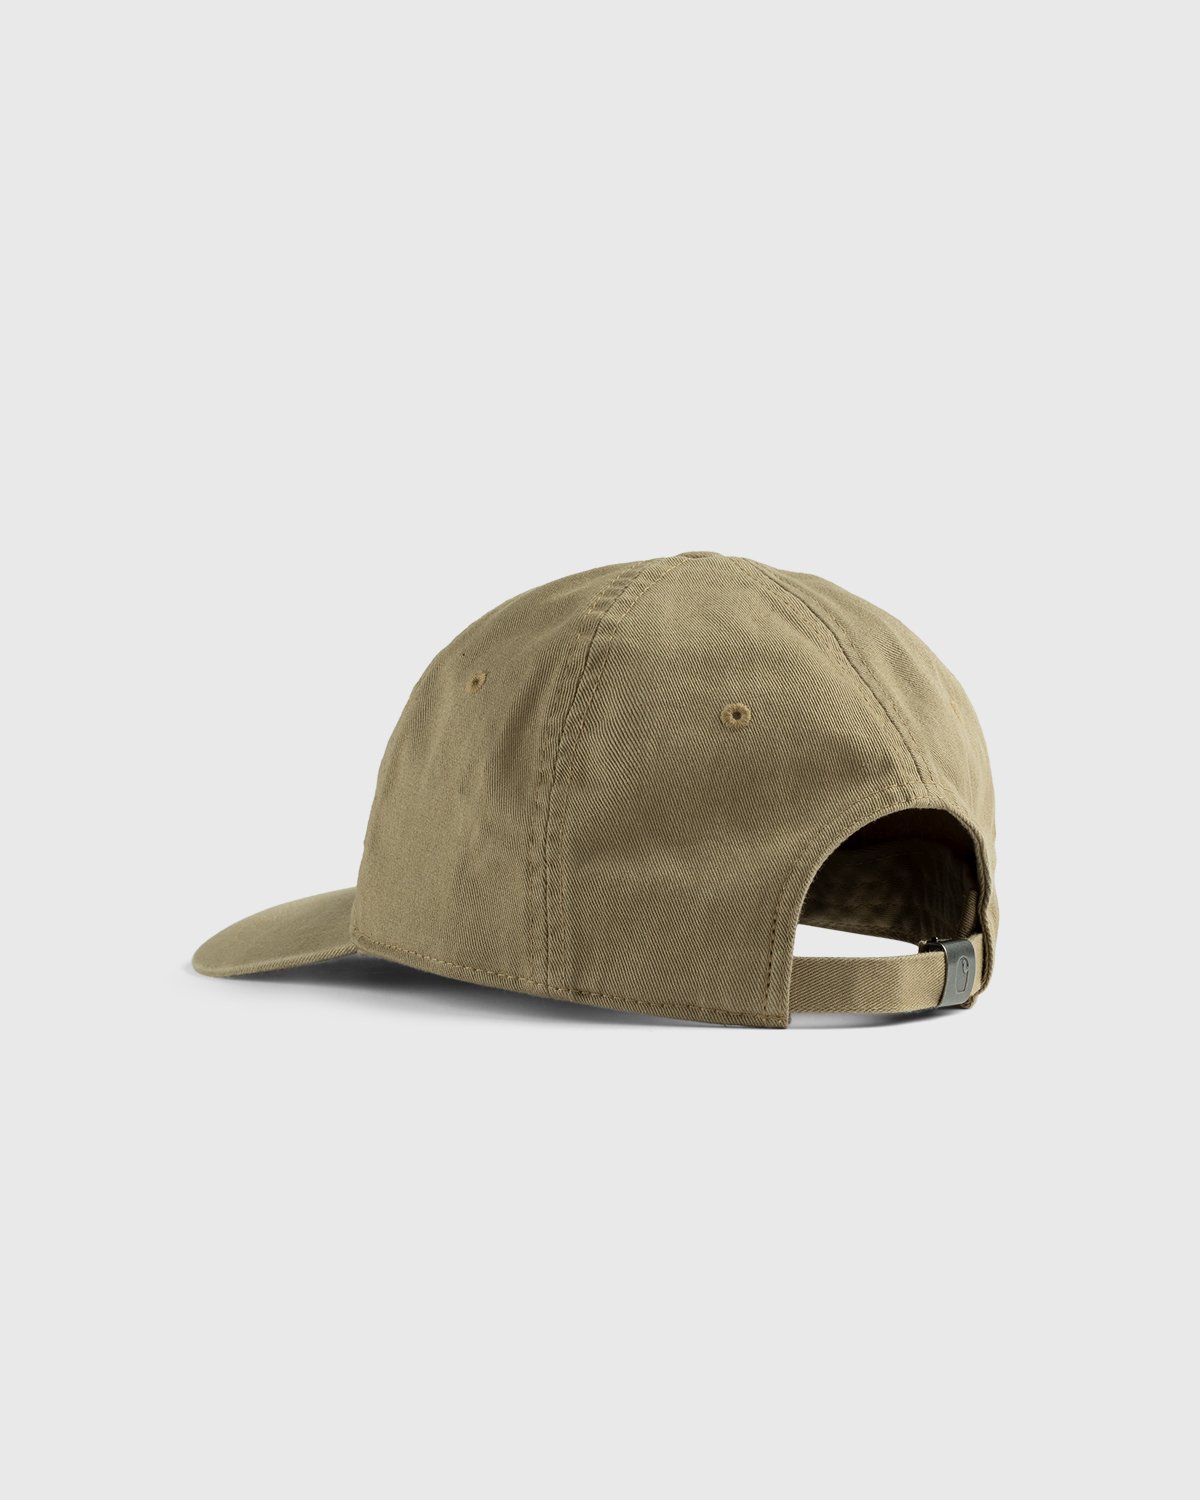 Carhartt WIP - Madison Logo Cap Natural Wall - Accessories - Beige - Image 3